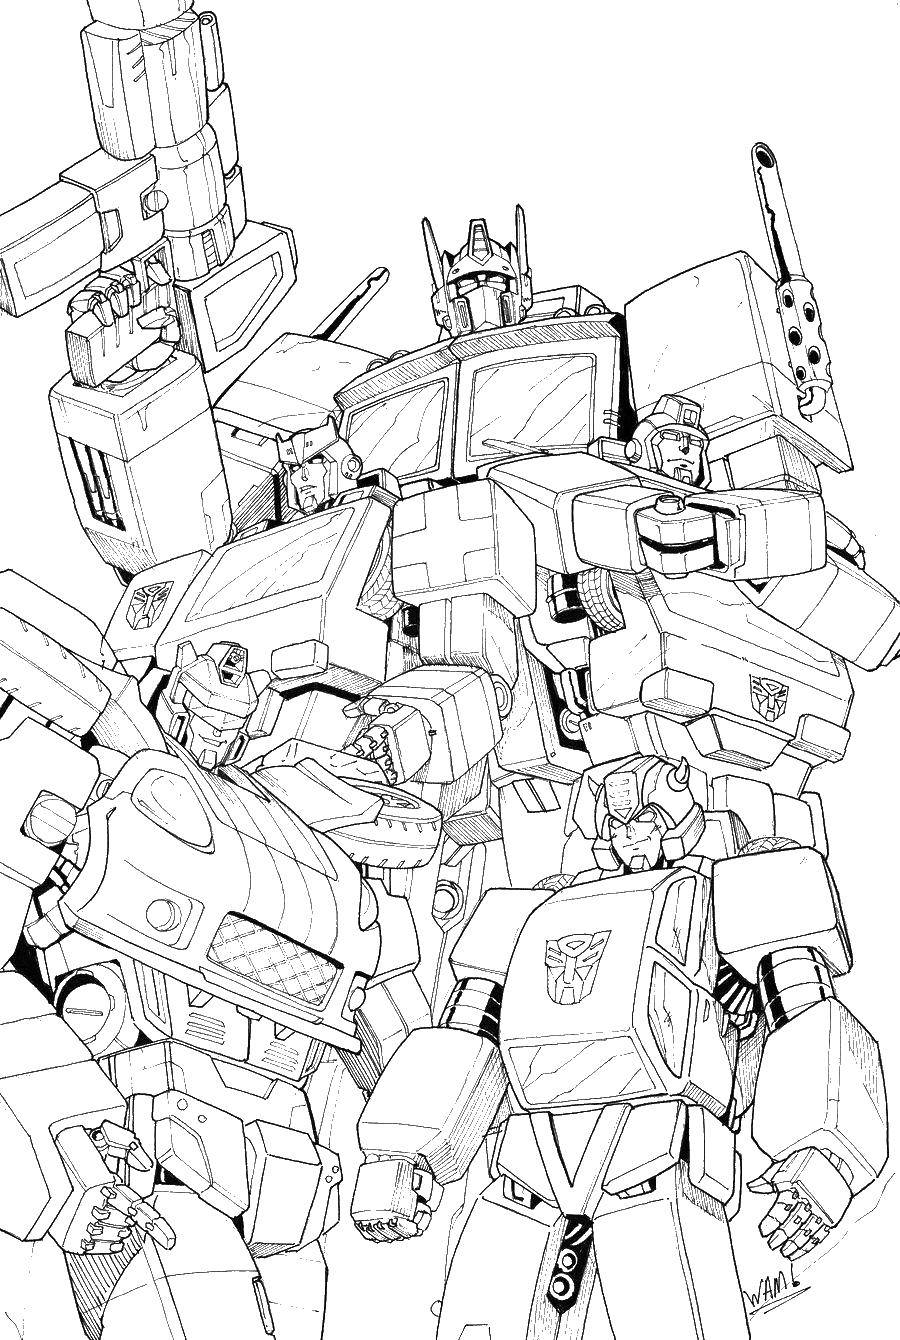 Coloring Transformers. Category transformers. Tags:  transformers, Autobots.